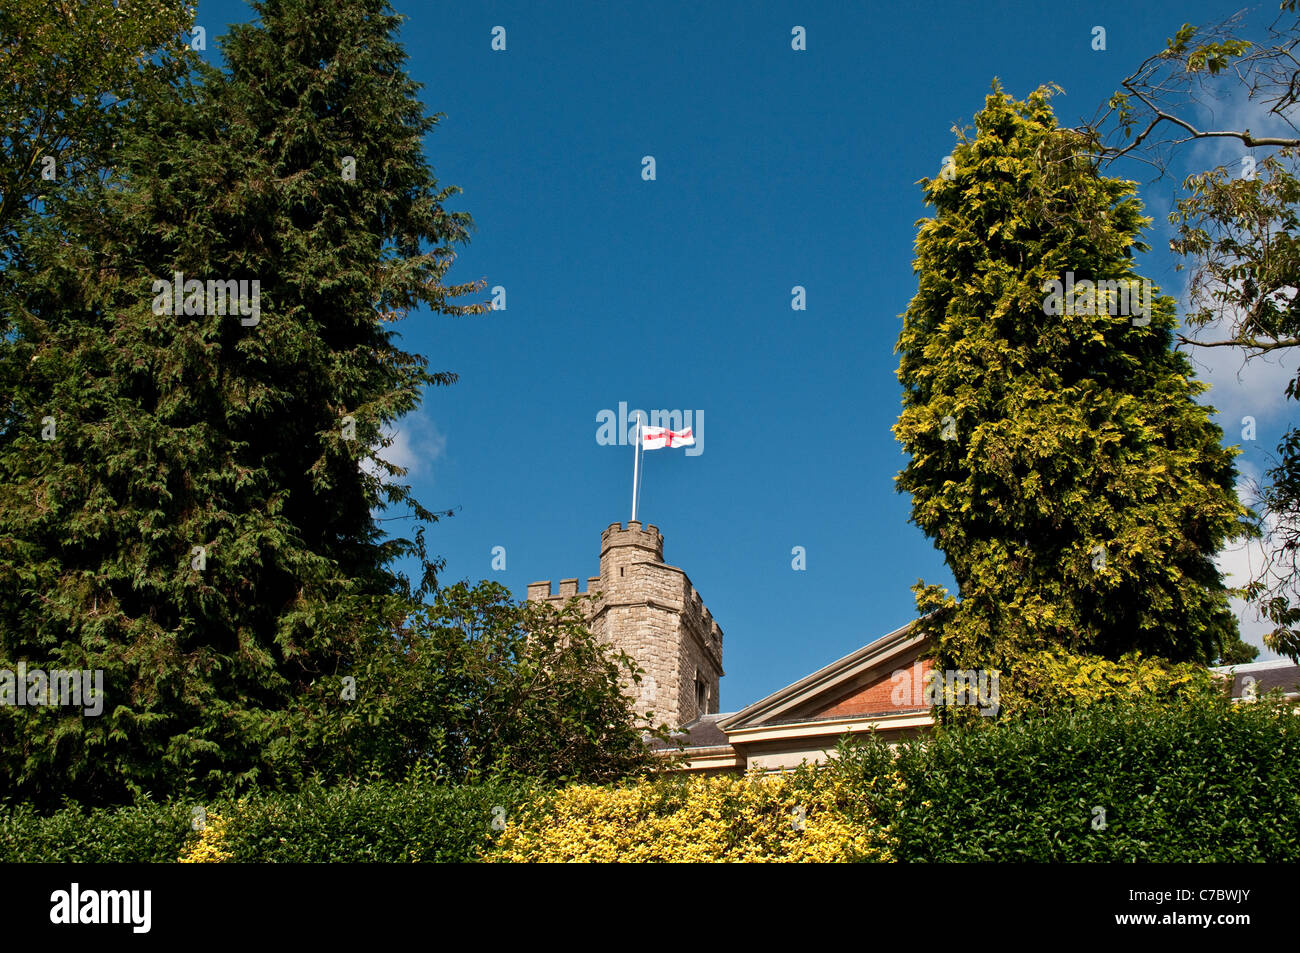 Union Jack waving in the wind on the tower of St Mary’s Parish Church, Twickenham, Middlesex, England, United Kingdom Stock Photo